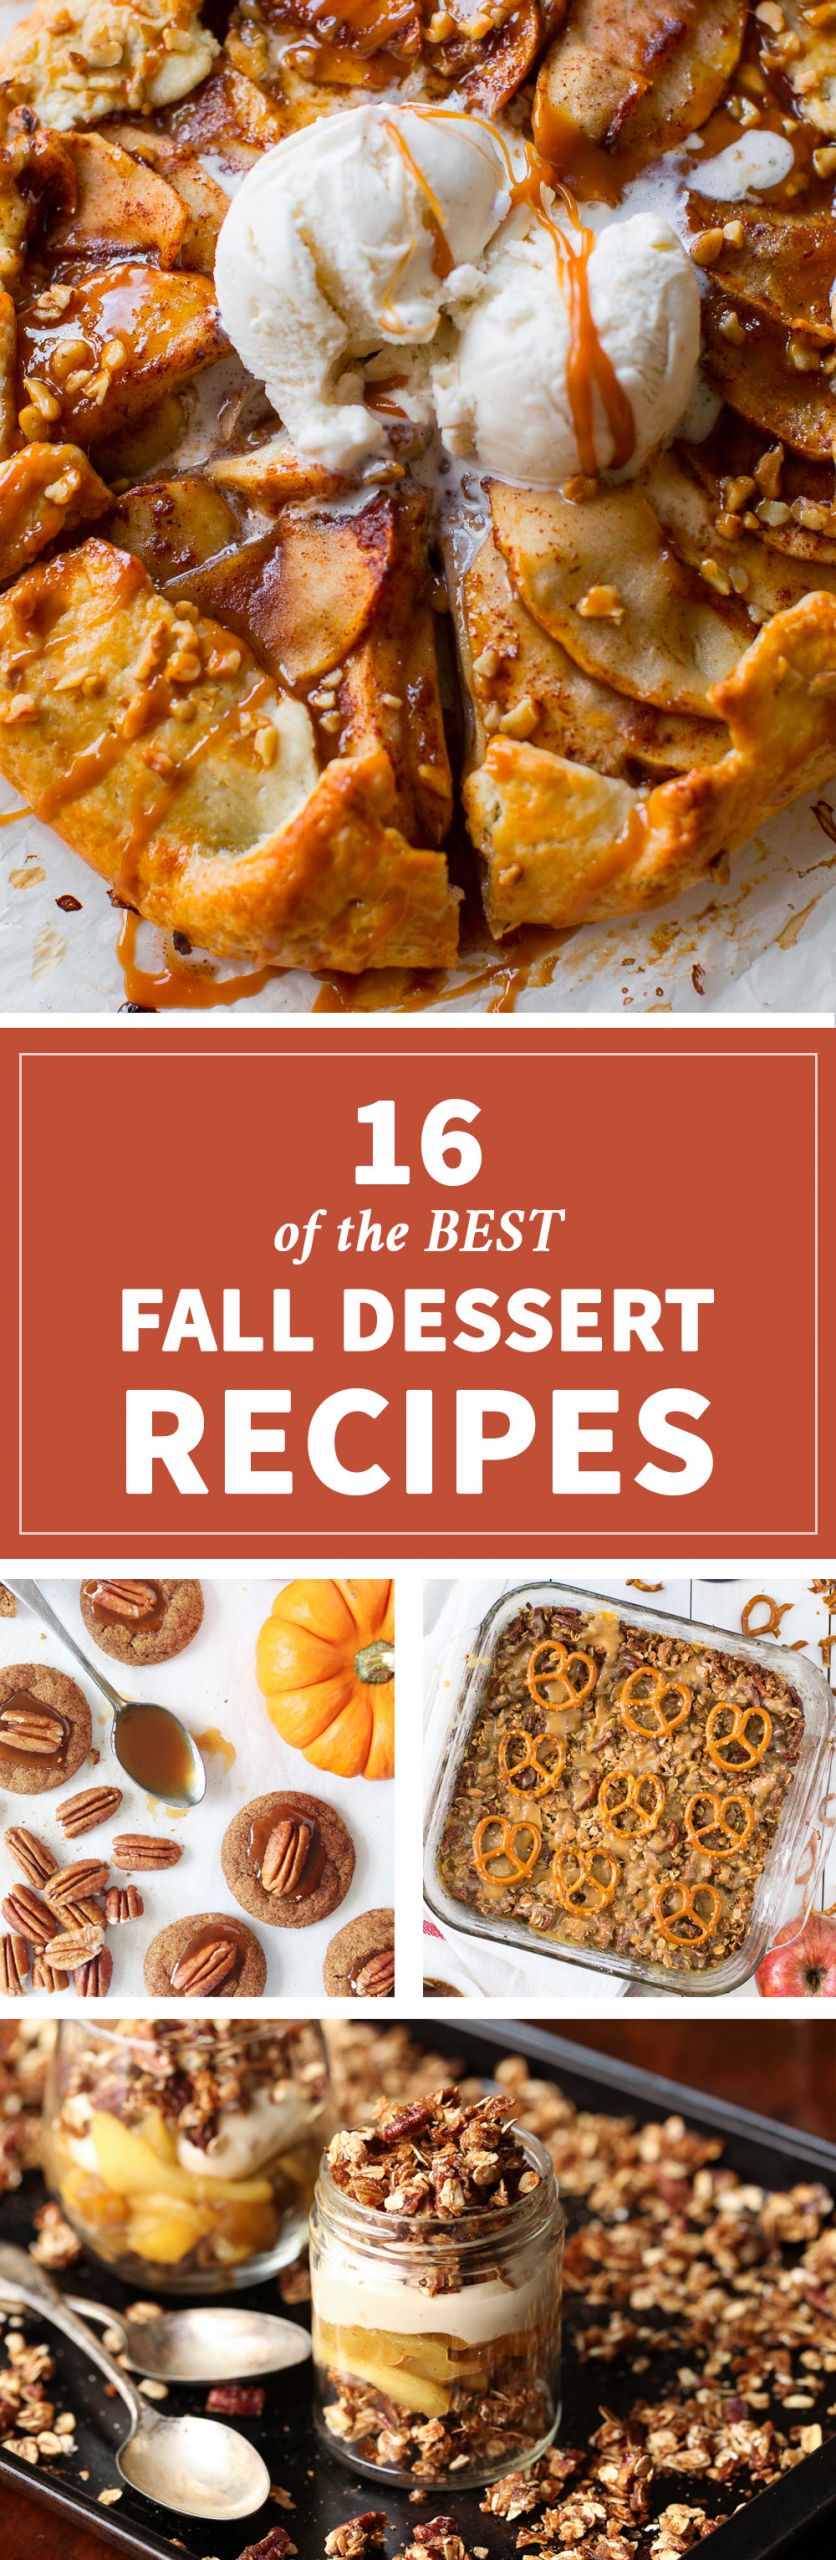 Fall Desserts Pinterest
 16 of the Best Fall Dessert Recipes Something About That